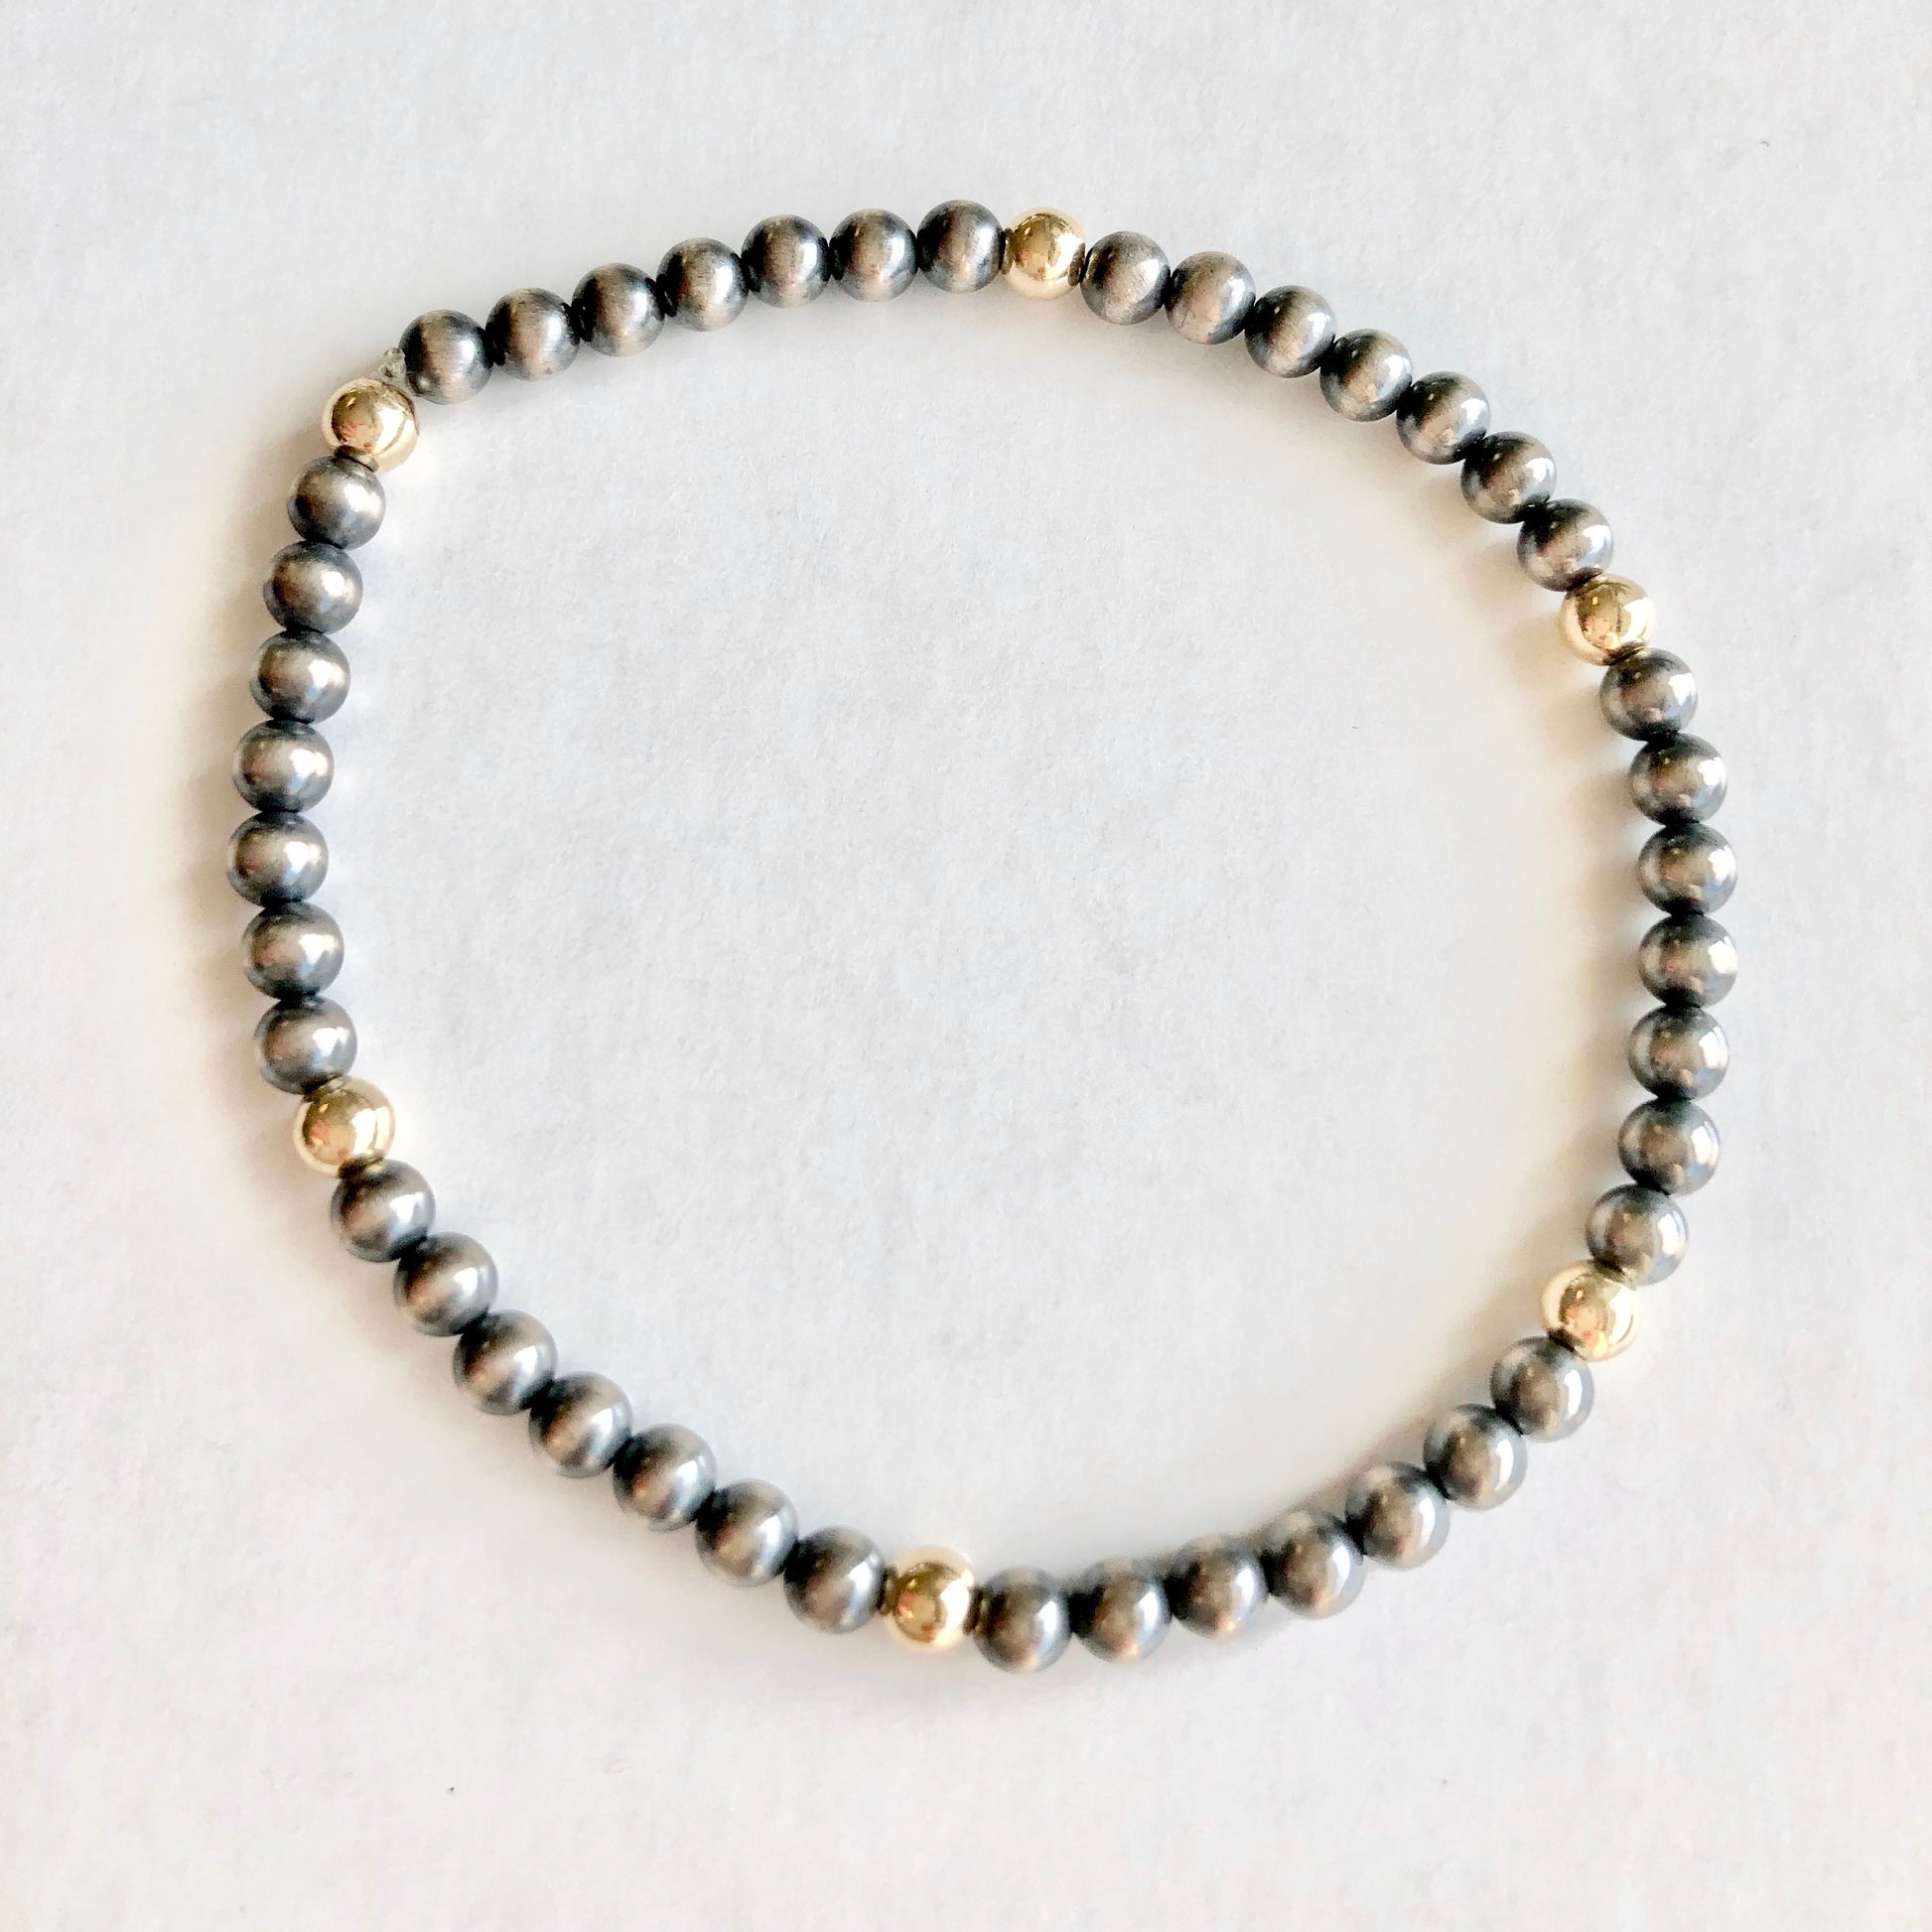 4mm Navajo Pearl Bracelet with 6 Gold Filled Beads Cuffs Richard Schmidt   